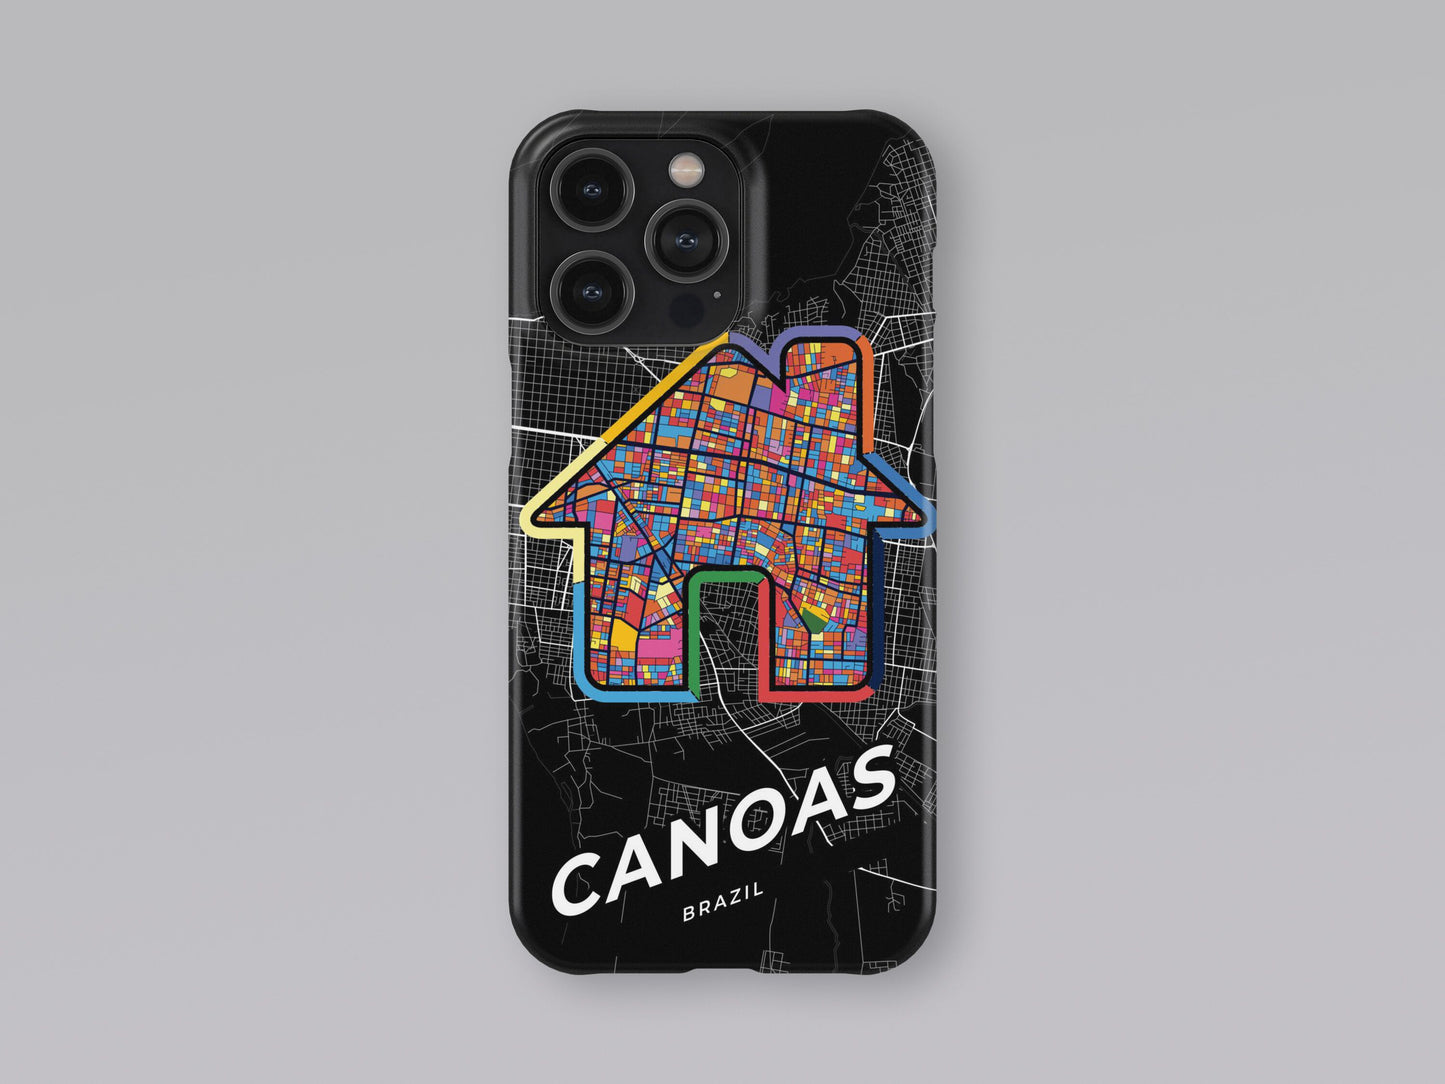 Canoas Brazil slim phone case with colorful icon. Birthday, wedding or housewarming gift. Couple match cases. 3